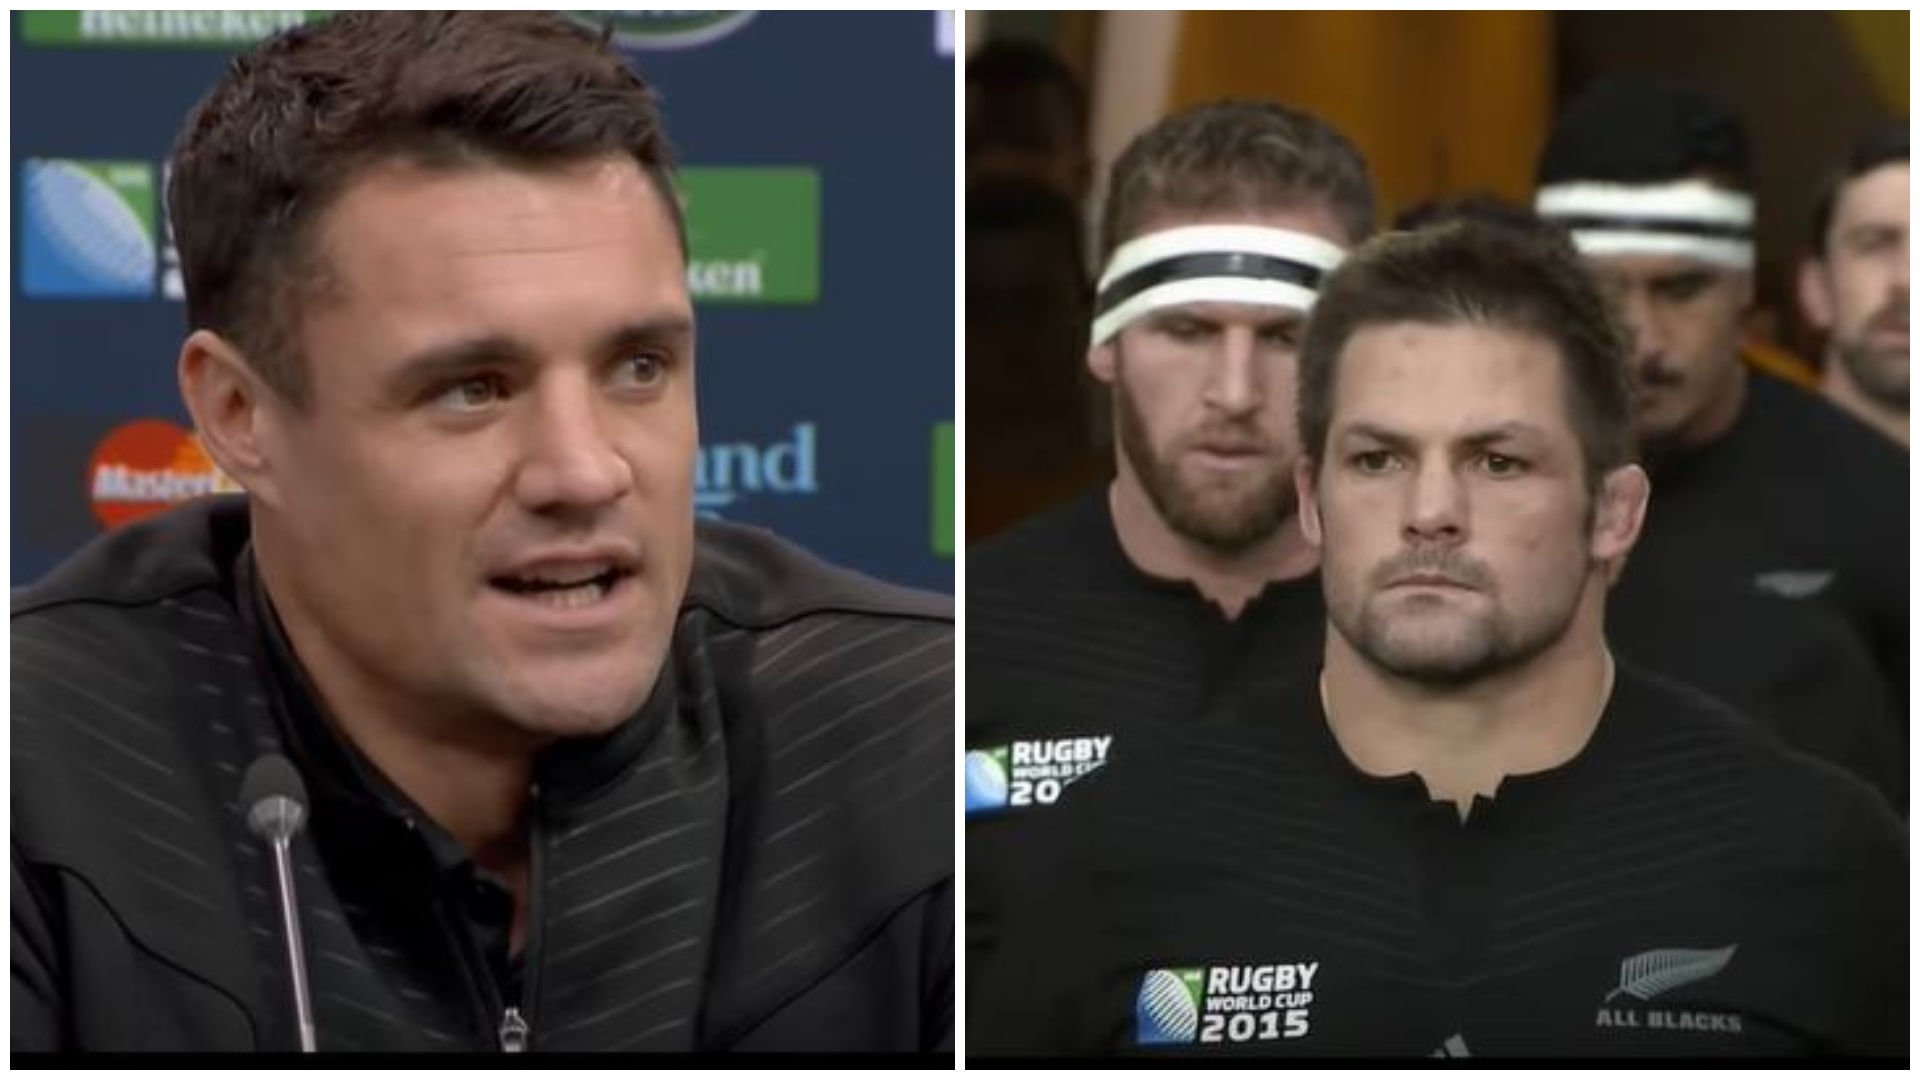 Why Richie McCaw apologised to Dan Carter on the pitch in 2015